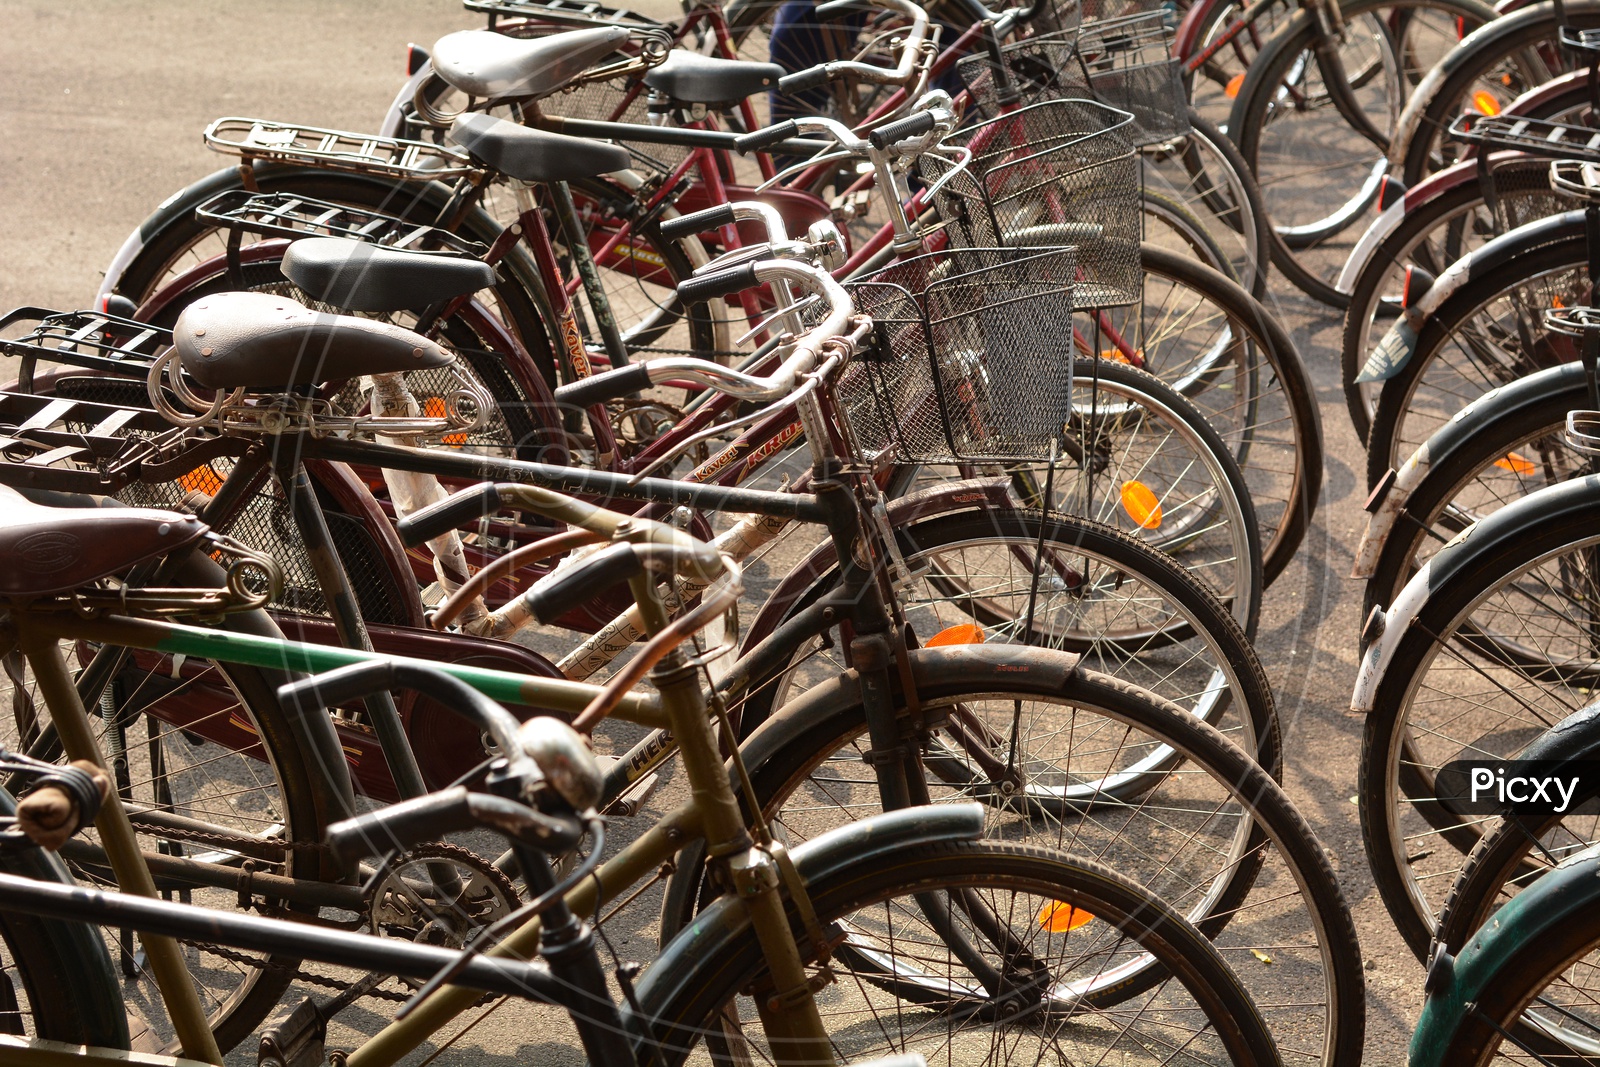 Bicycles Or Cycles Parked In a Row